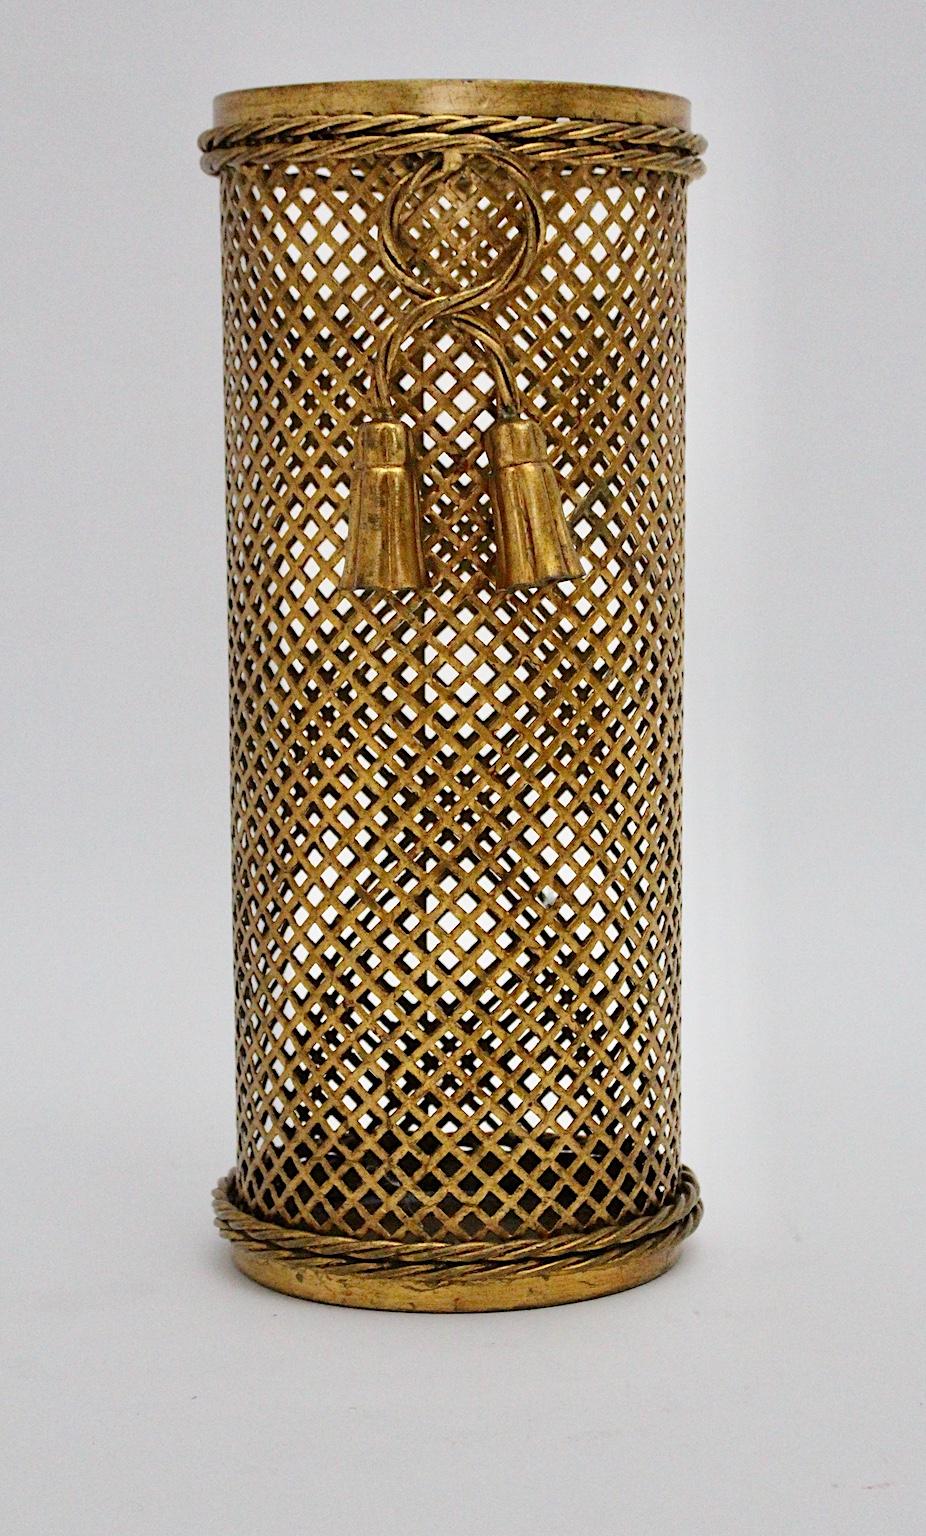 A Hollywood Regency style vintage gilded umbrella stand, which was made in Florence, Italy, circa 1950 by Li Puma Firenze. The amazing Mid-Century Modern gilded umbrella stand is a perforated metal stand, which shows metalwork pattern, tassel and